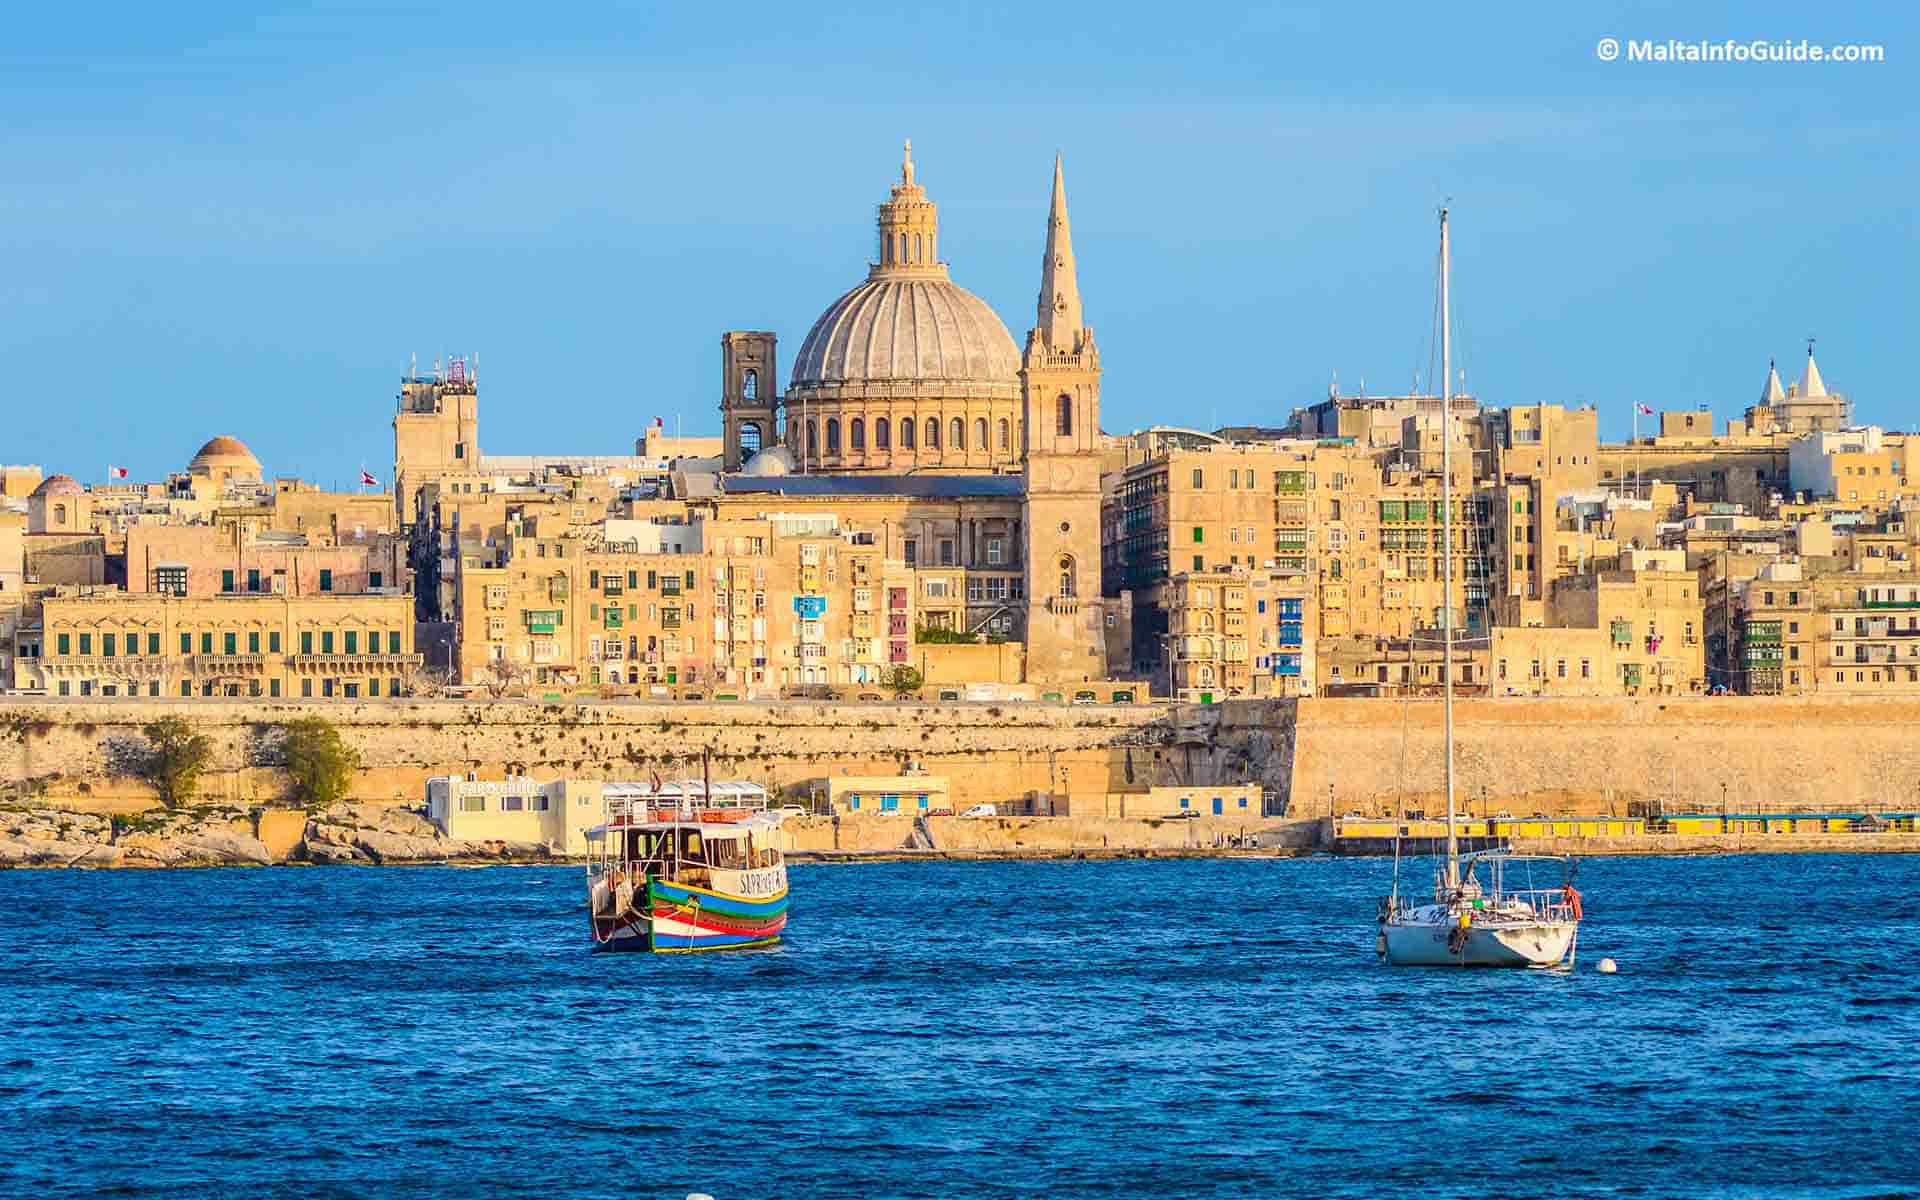 View of Valletta Churches - Carmelite Church and St. Paul's Pro-Cathedral